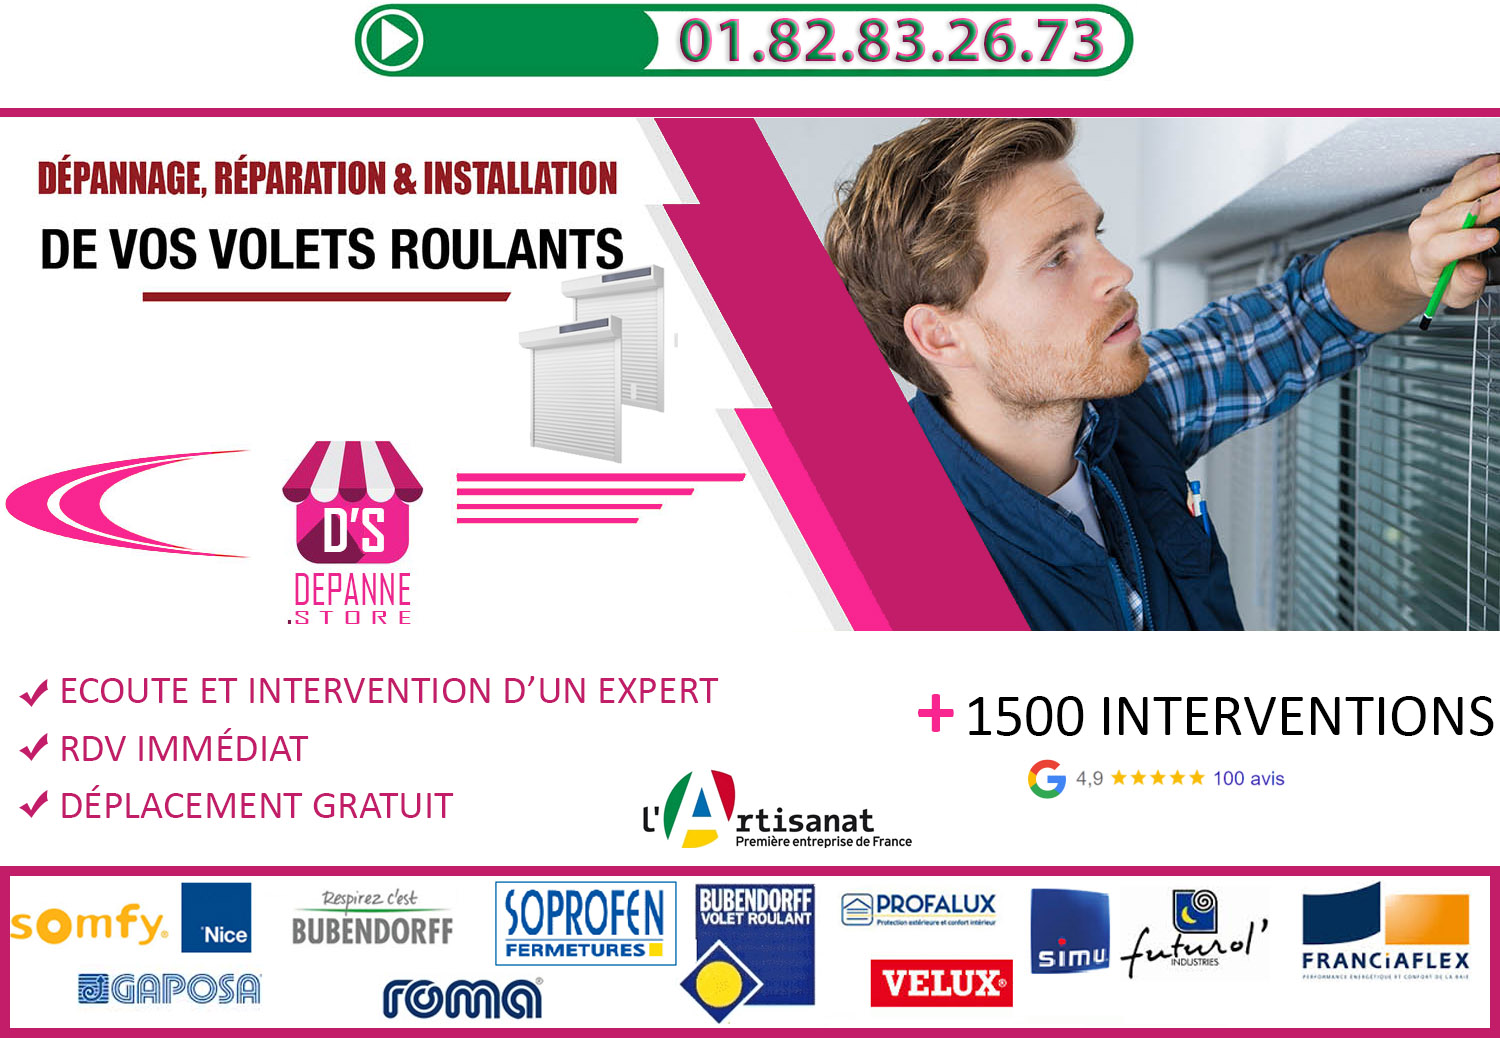 Depannage Volet Roulant Bailly Romainvilliers 77700